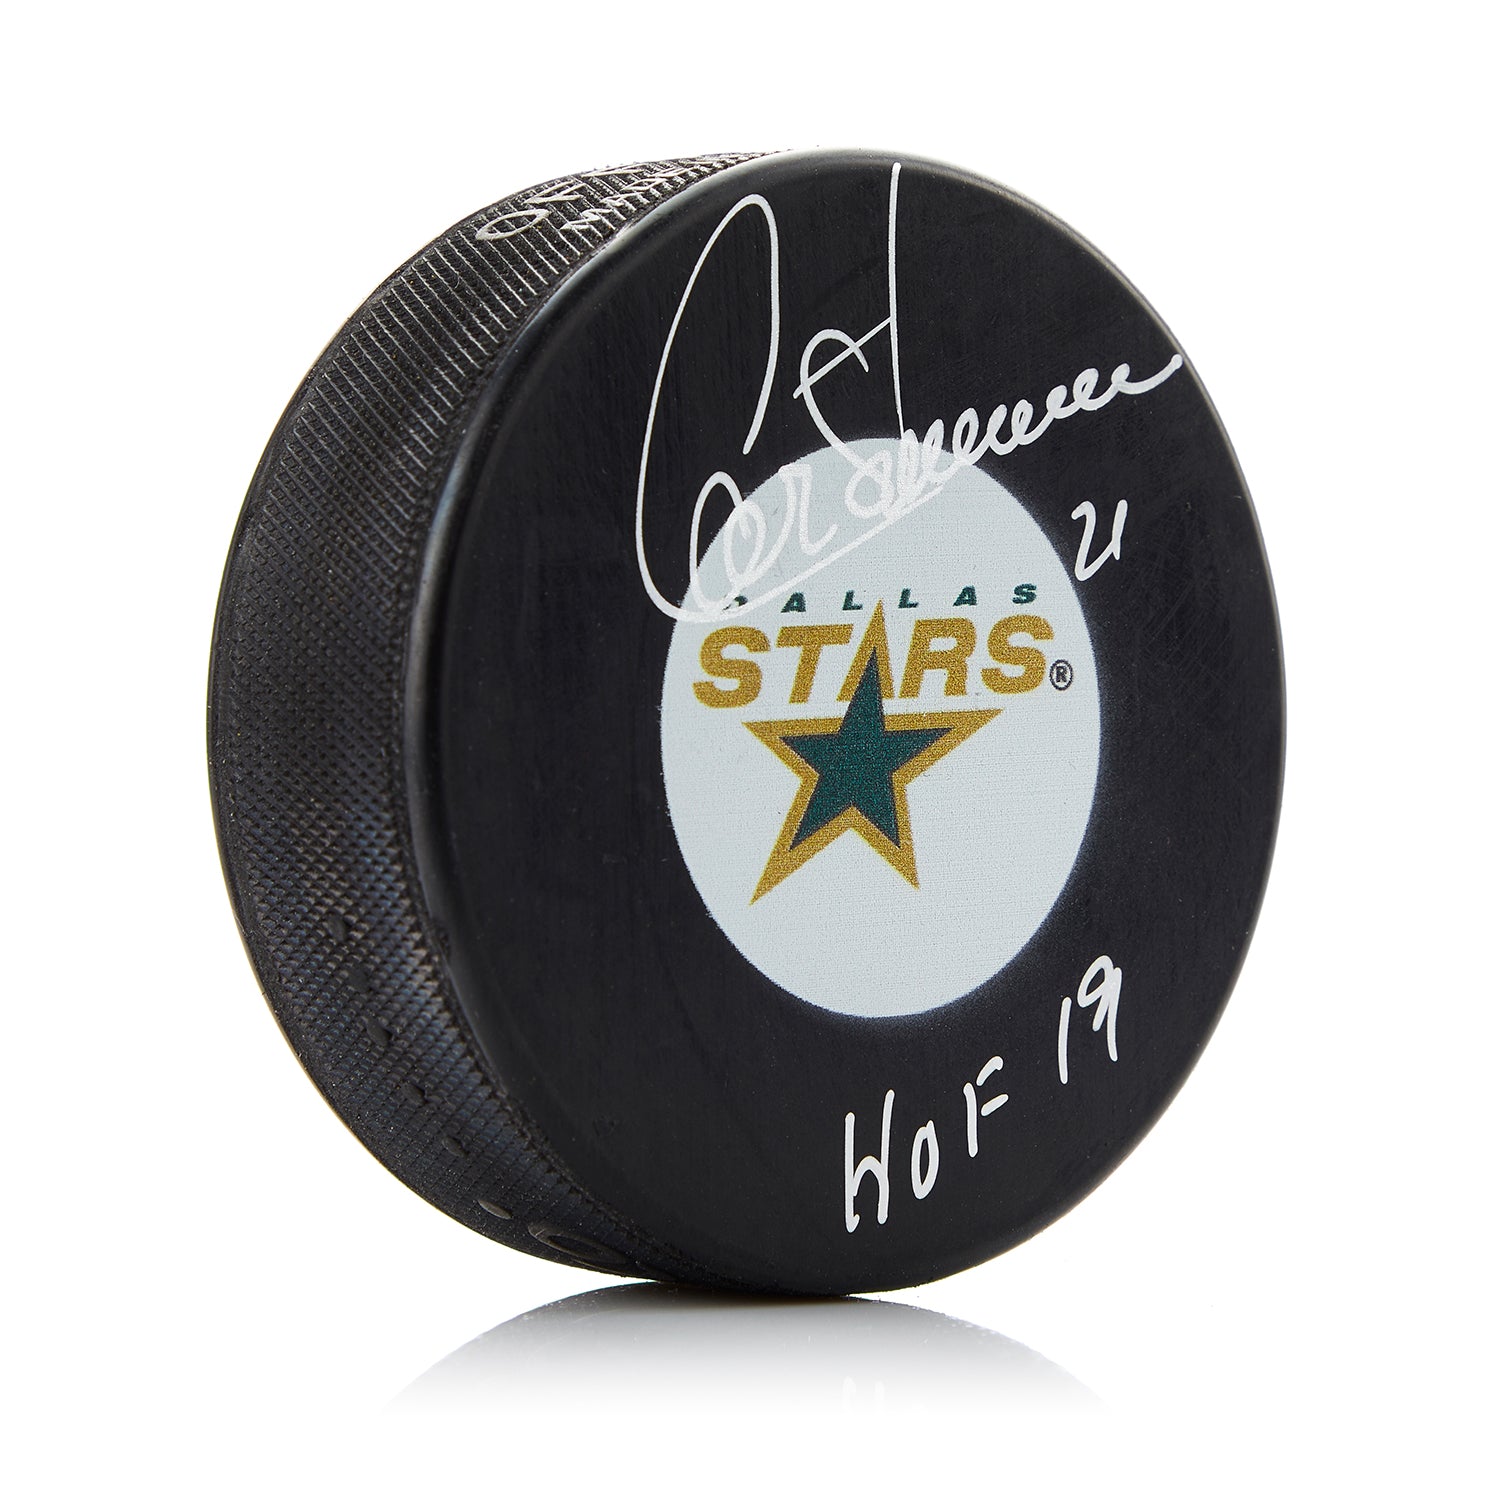 Guy Carbonneau Dallas Stars Autographed Hockey Puck with HOF 19 Note